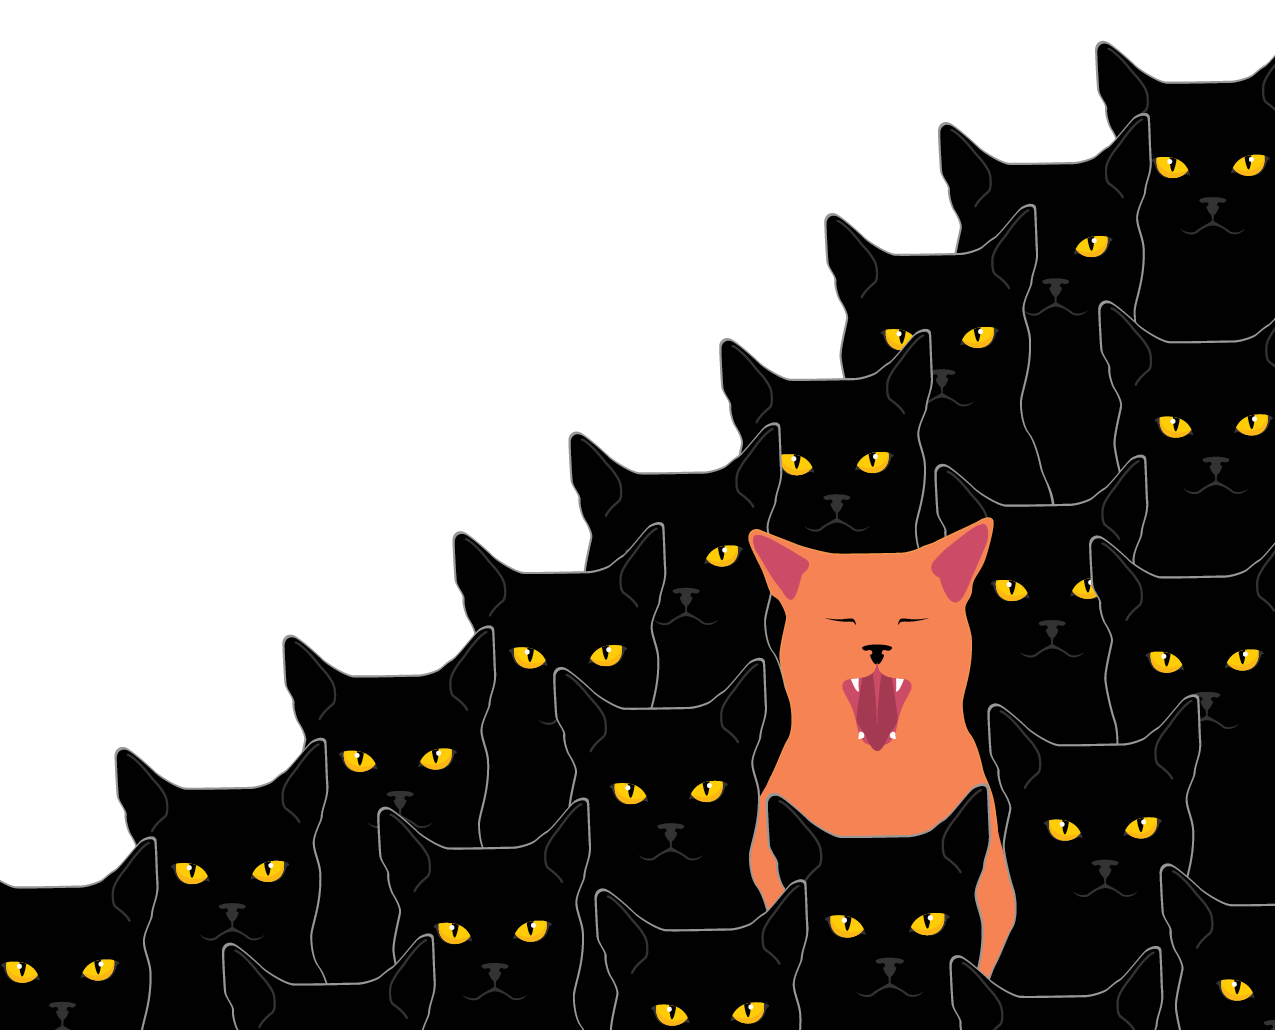 Numerous black cats with one bright orange cat among them